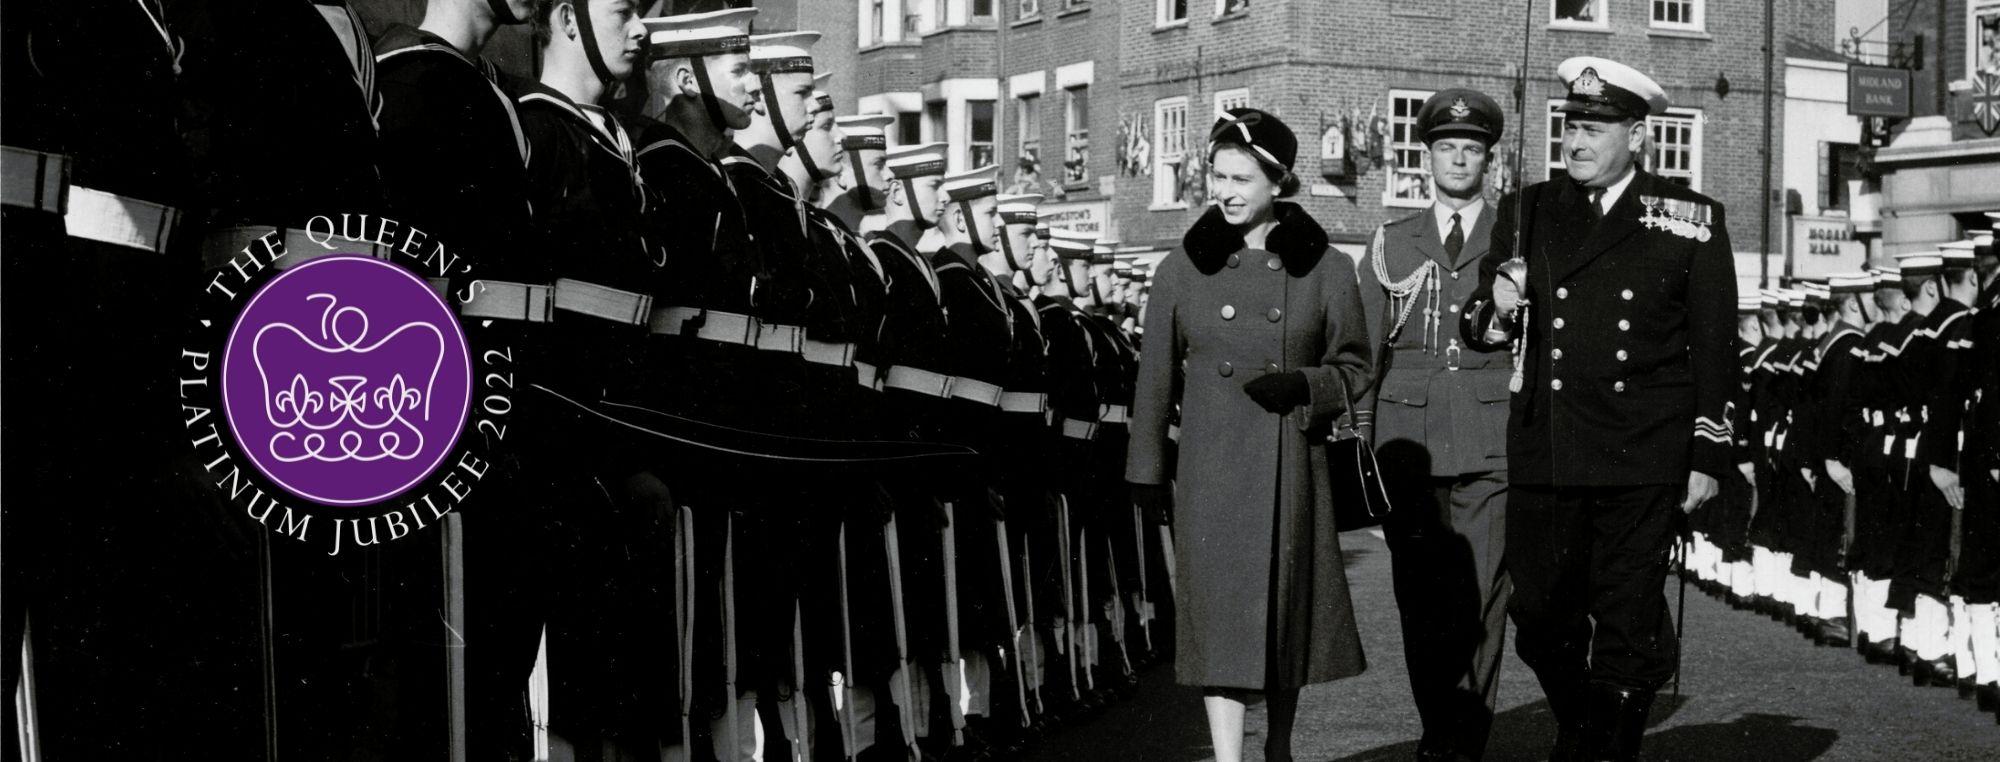 The Queen walking through Kingston Market place beside a row of Cadets